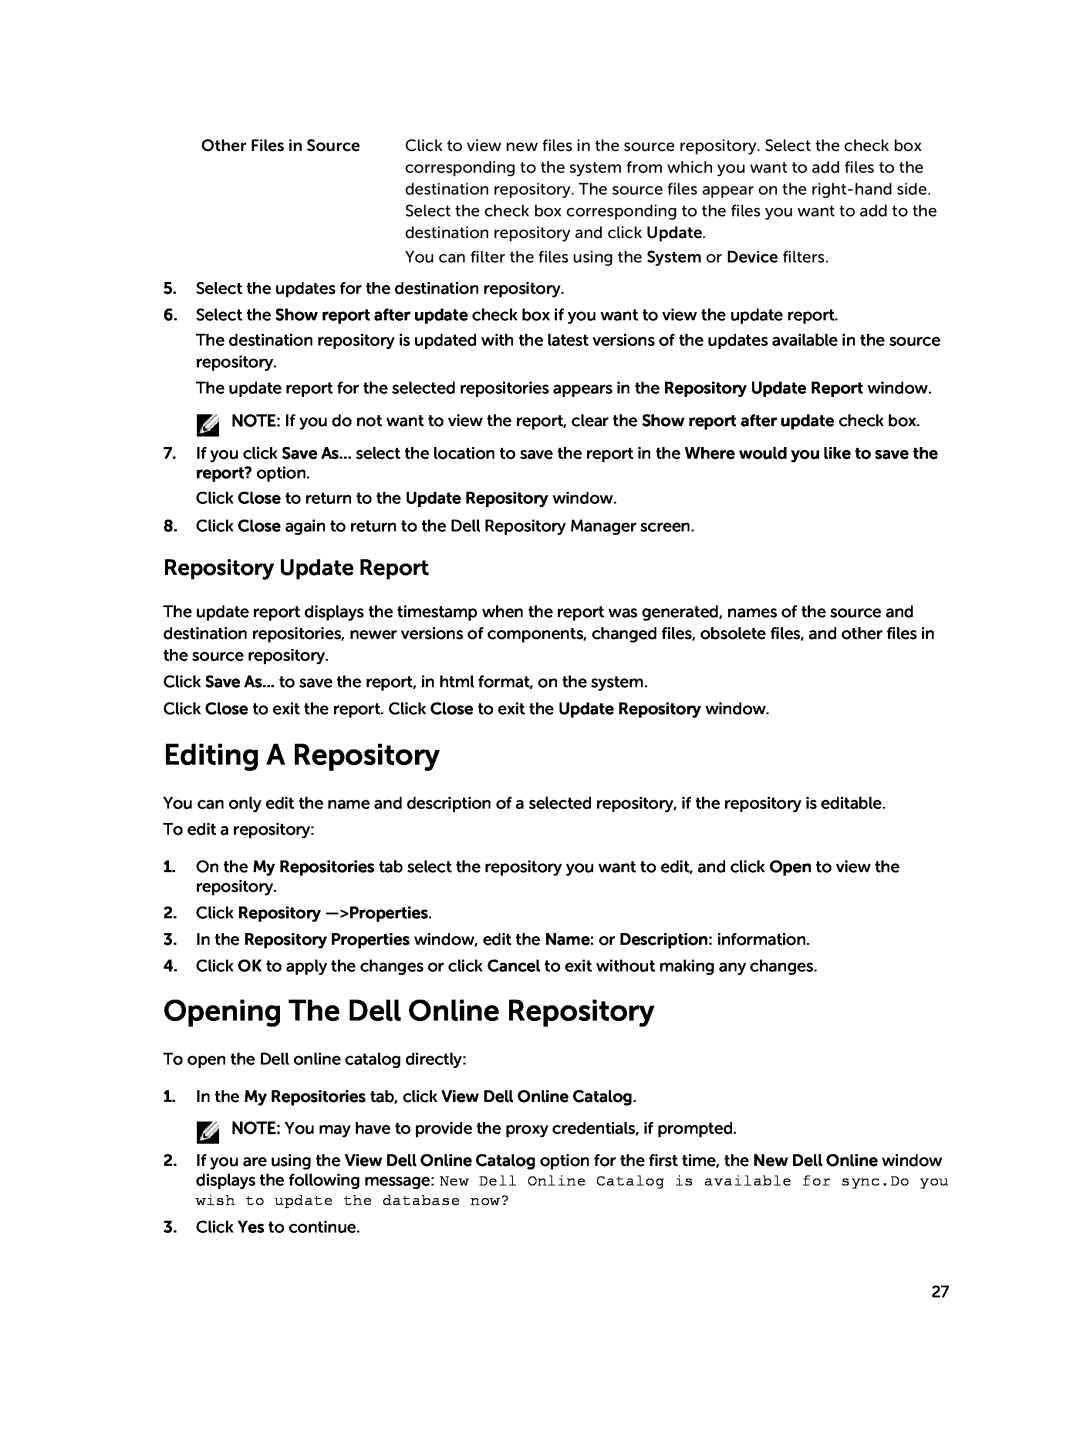 Dell 1.8 manual Editing A Repository, Opening The Dell Online Repository, Repository Update Report 